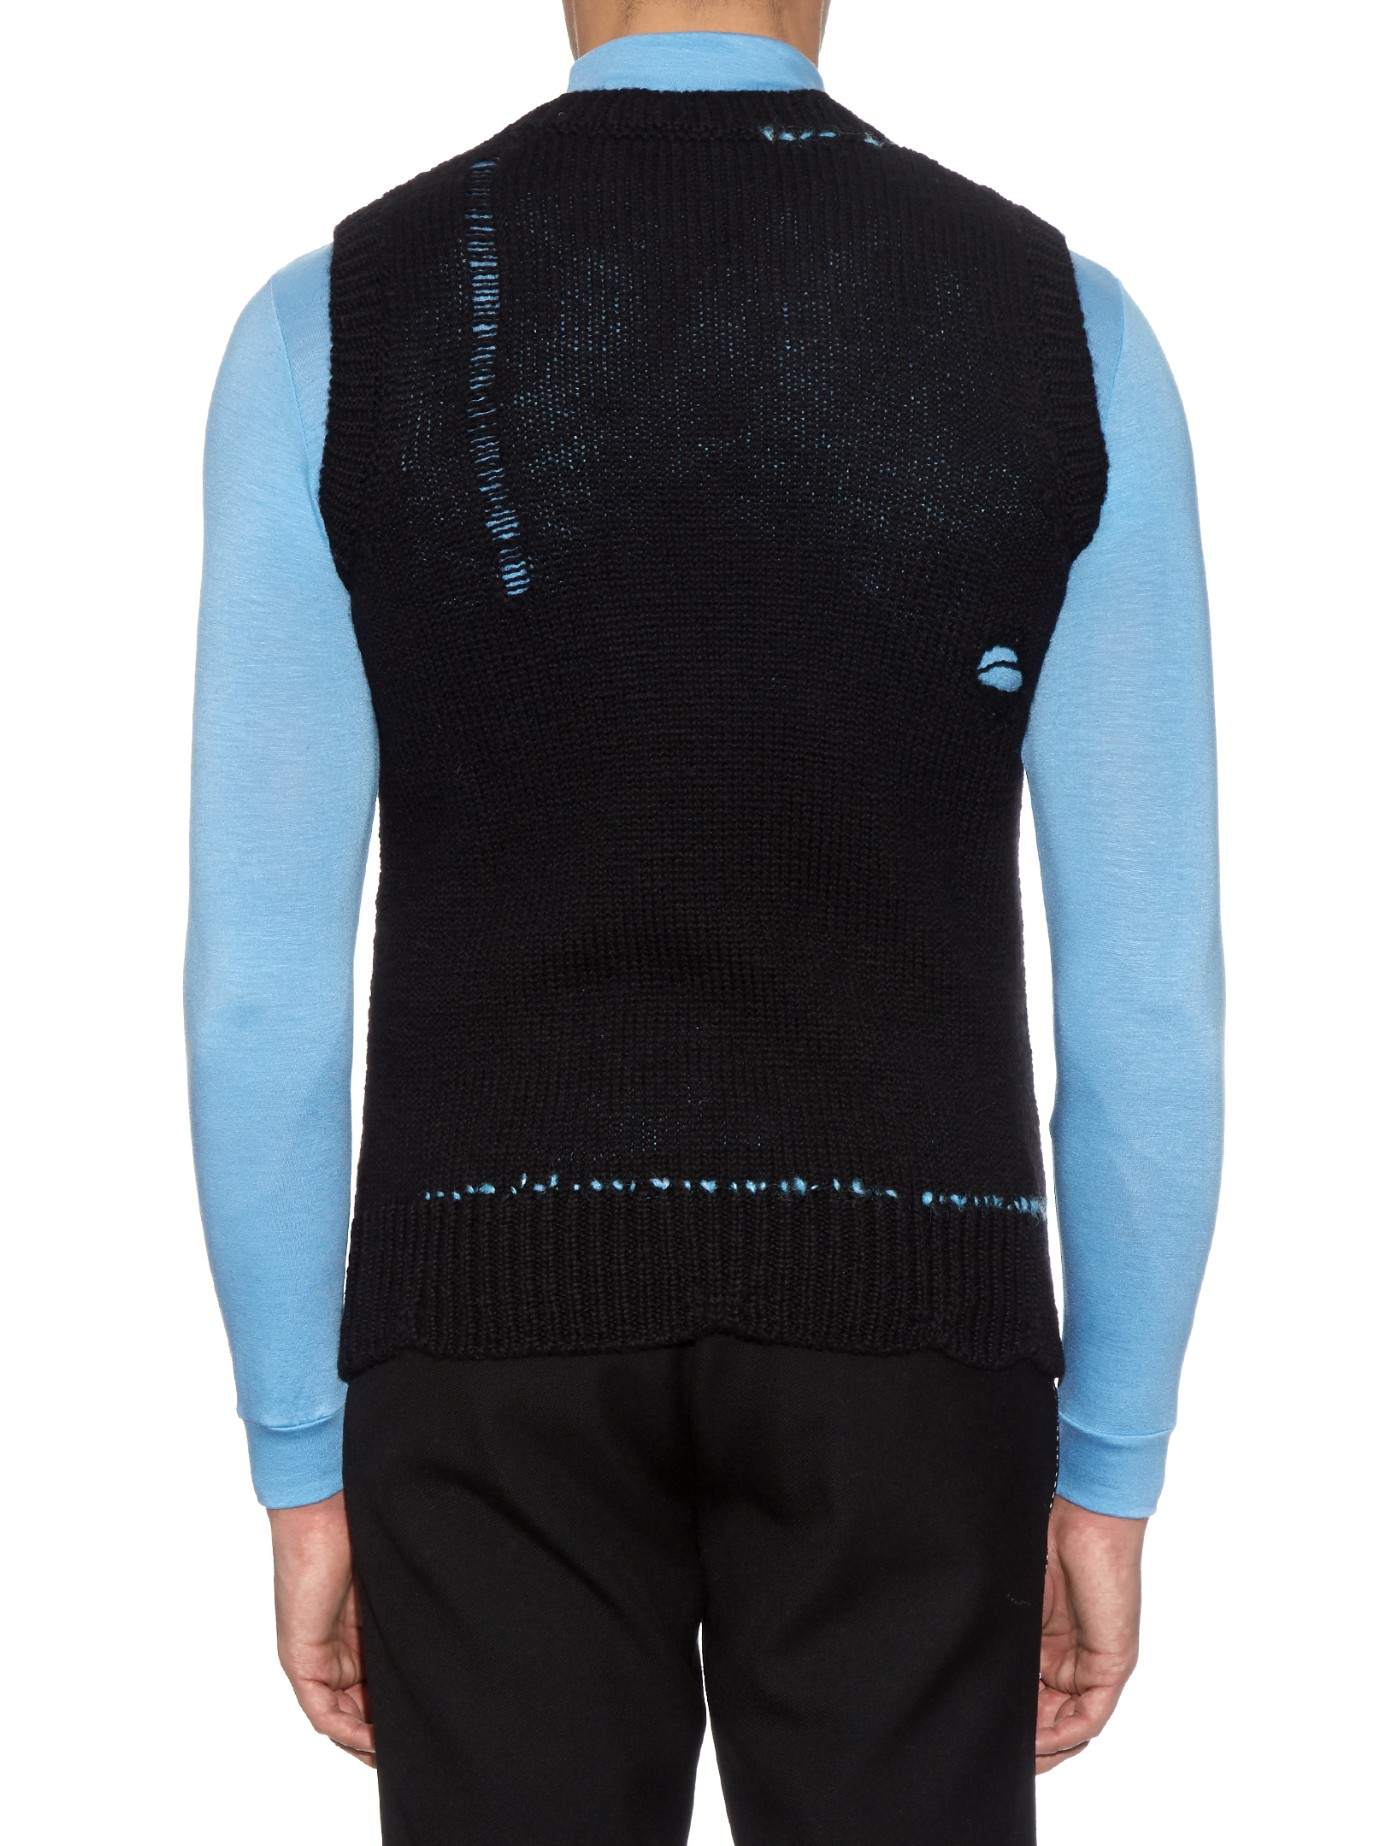 Lyst - Raf Simons Distressed-knit Wool Sweater in Black for Men